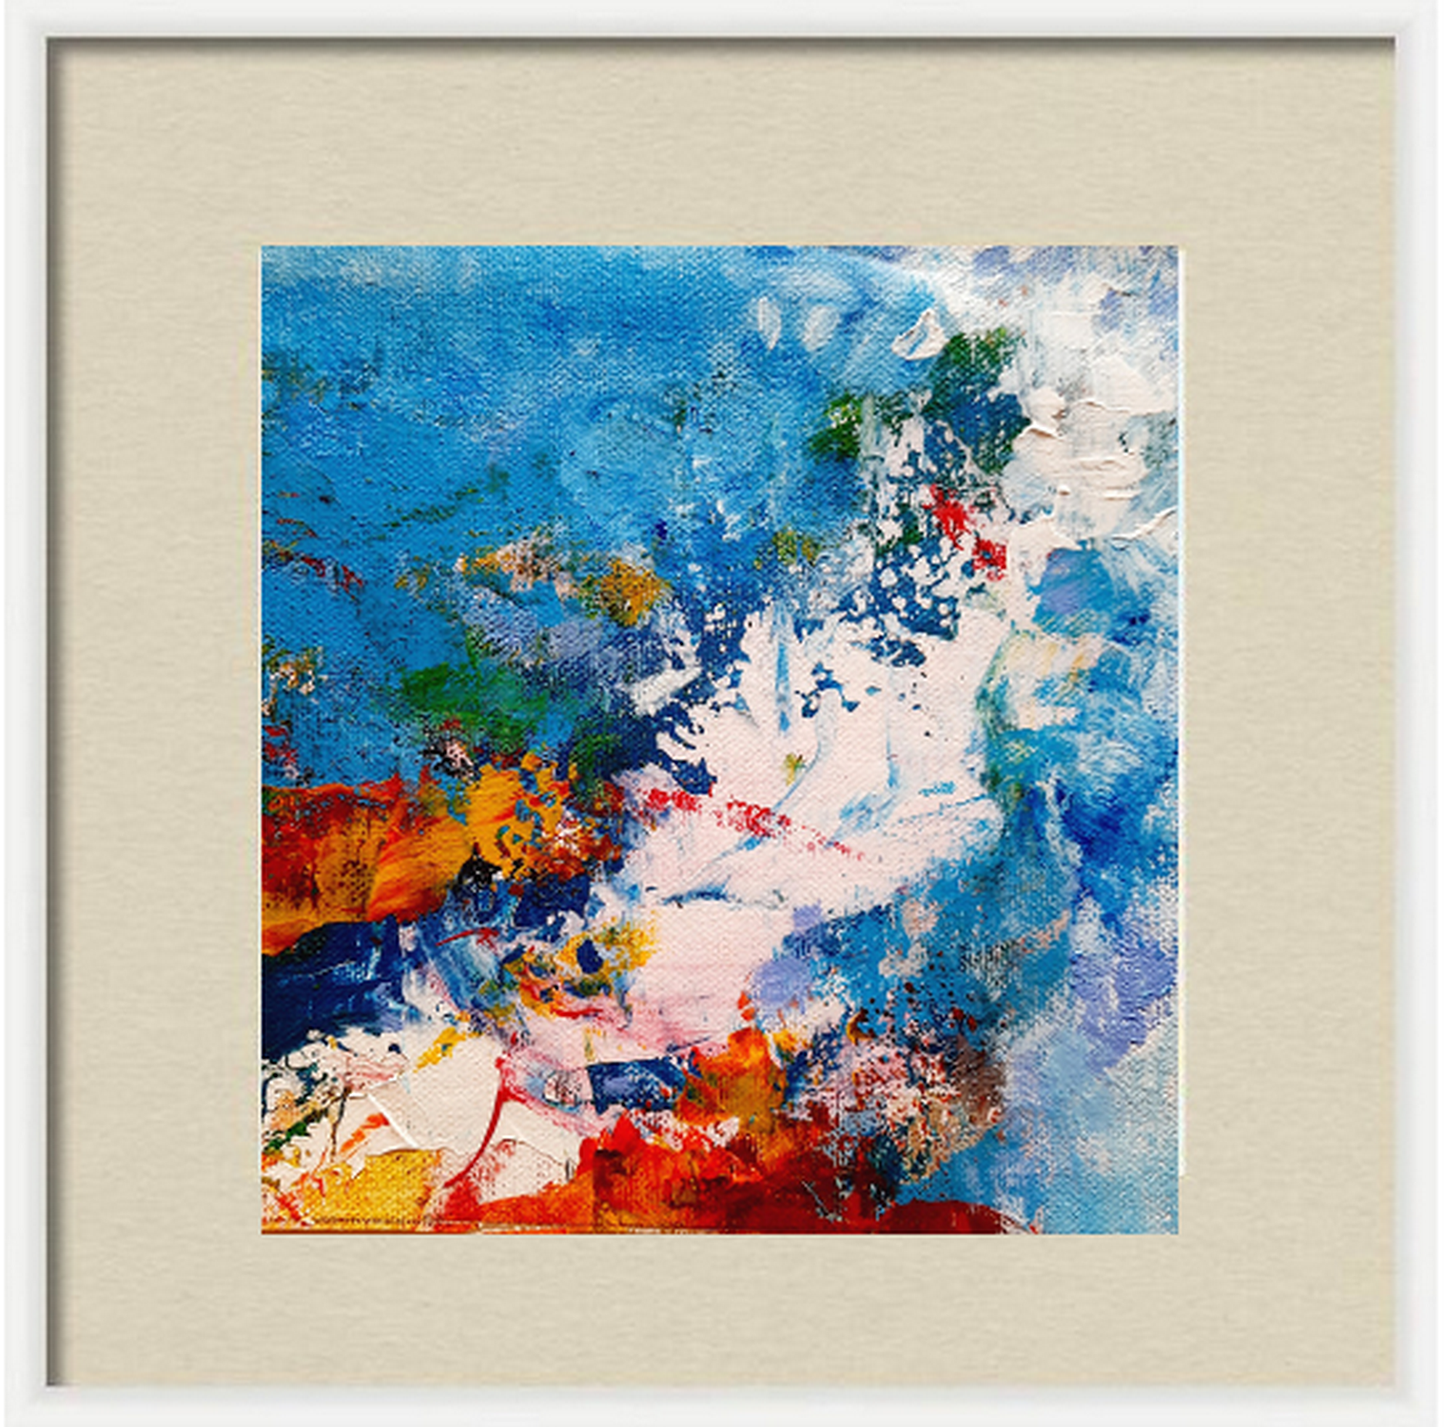 The Ocean bleeds - Abstract painting  virtual frame view